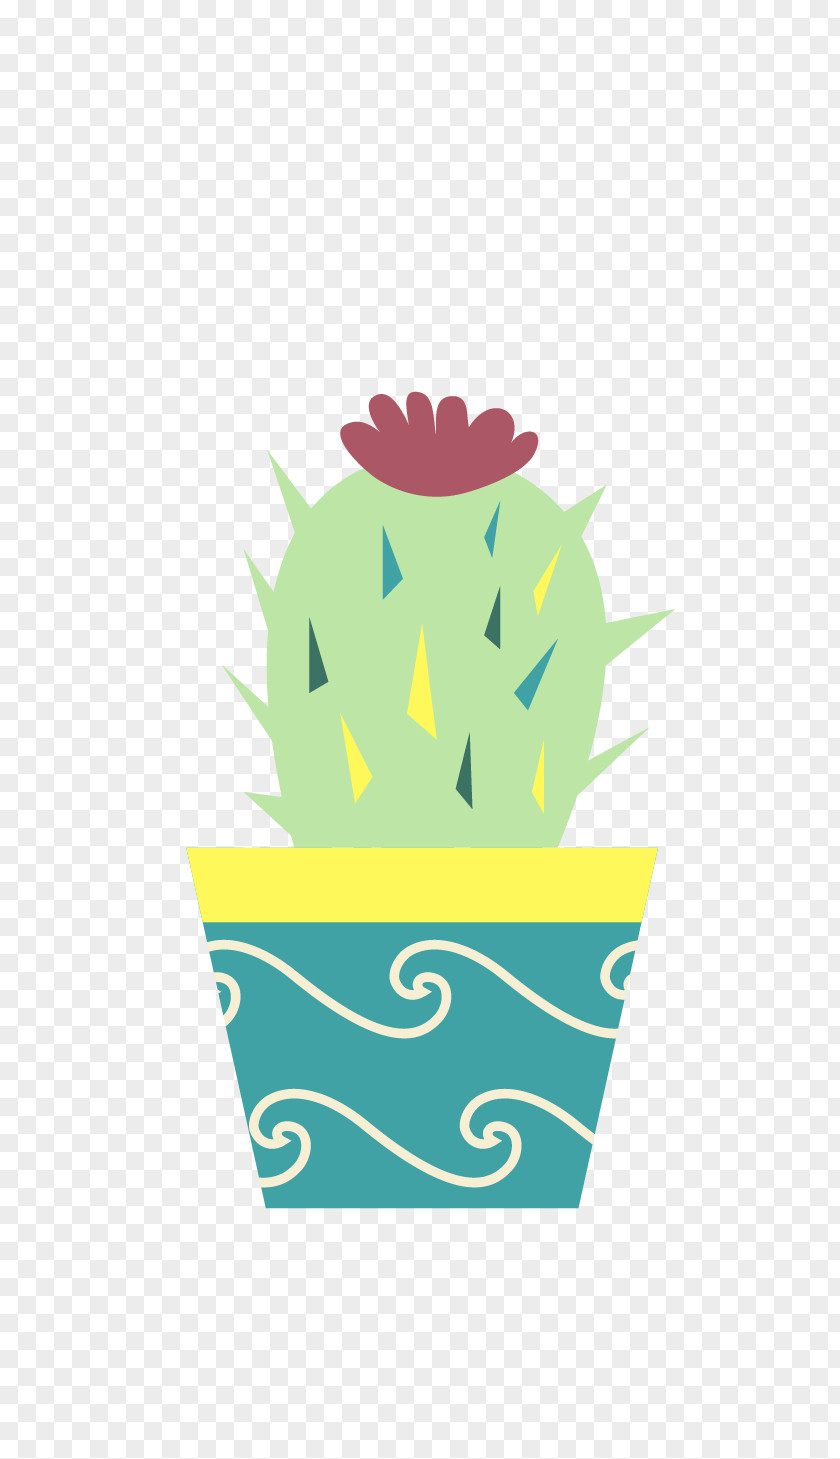 Blooming Cactus Vector Graphics Image PNG